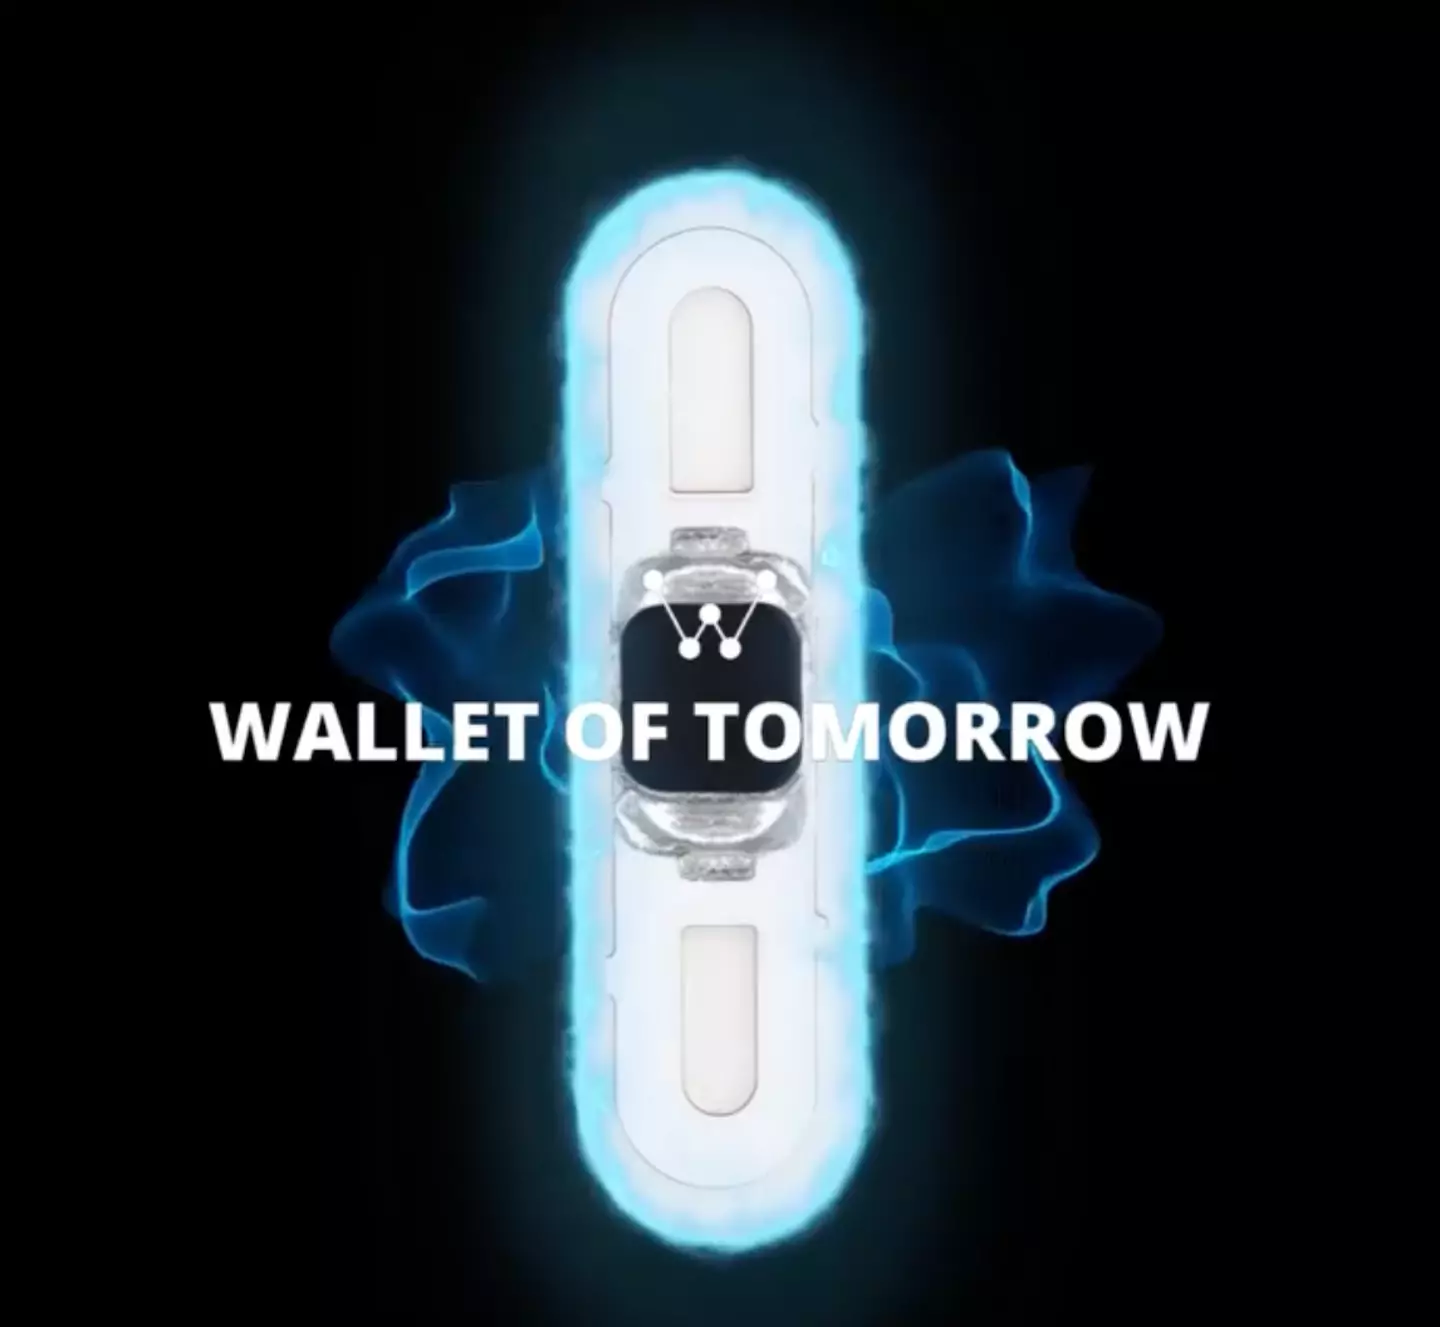 Walletmor claims to be the first ever business to sell bank card chips that can be implanted into humans.